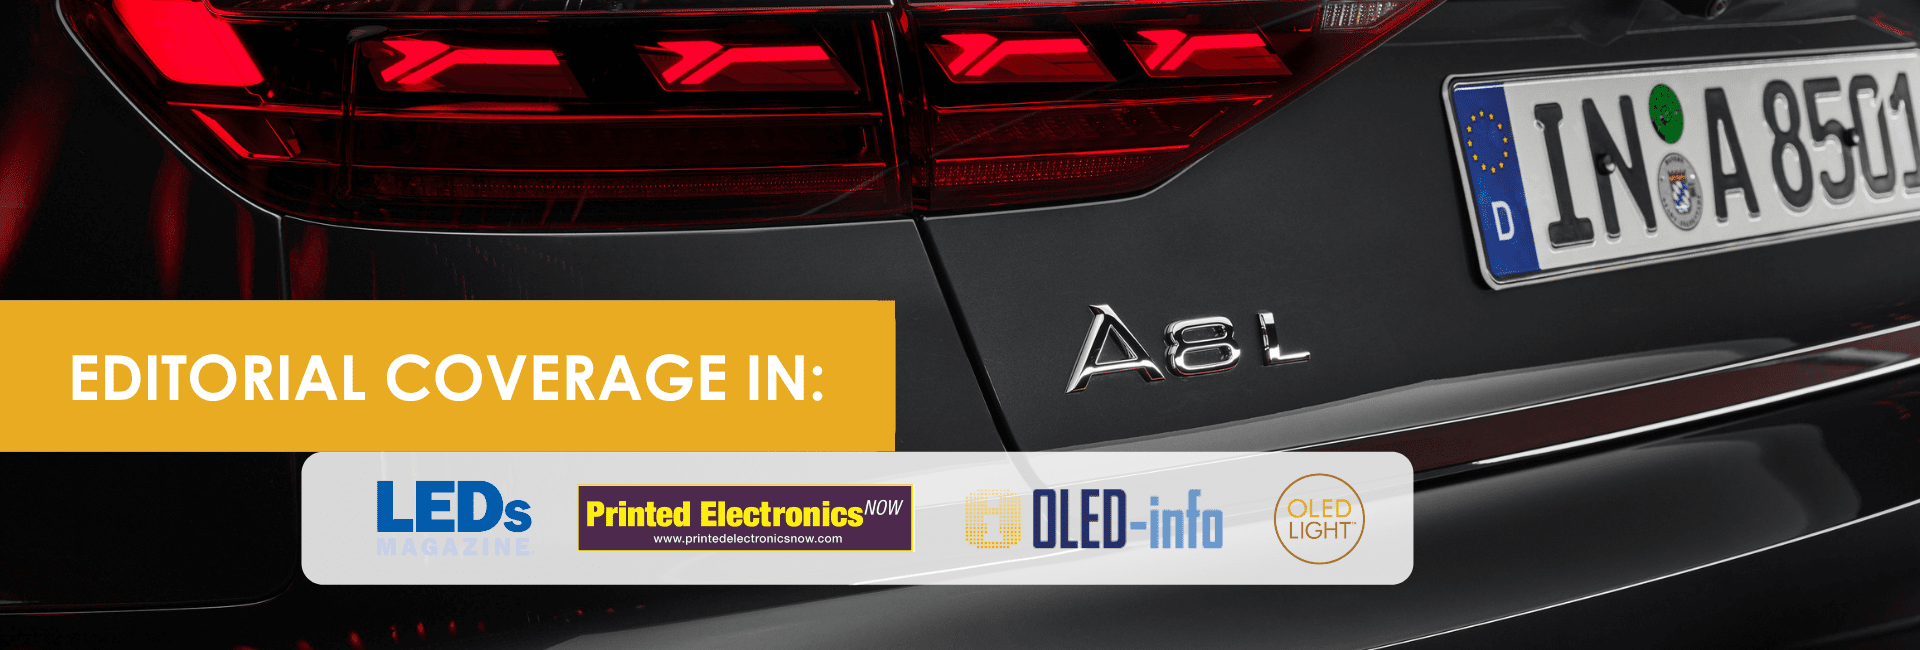 What's the Buzz? Industry Excited About Digital OLED Lighting in Audi A8